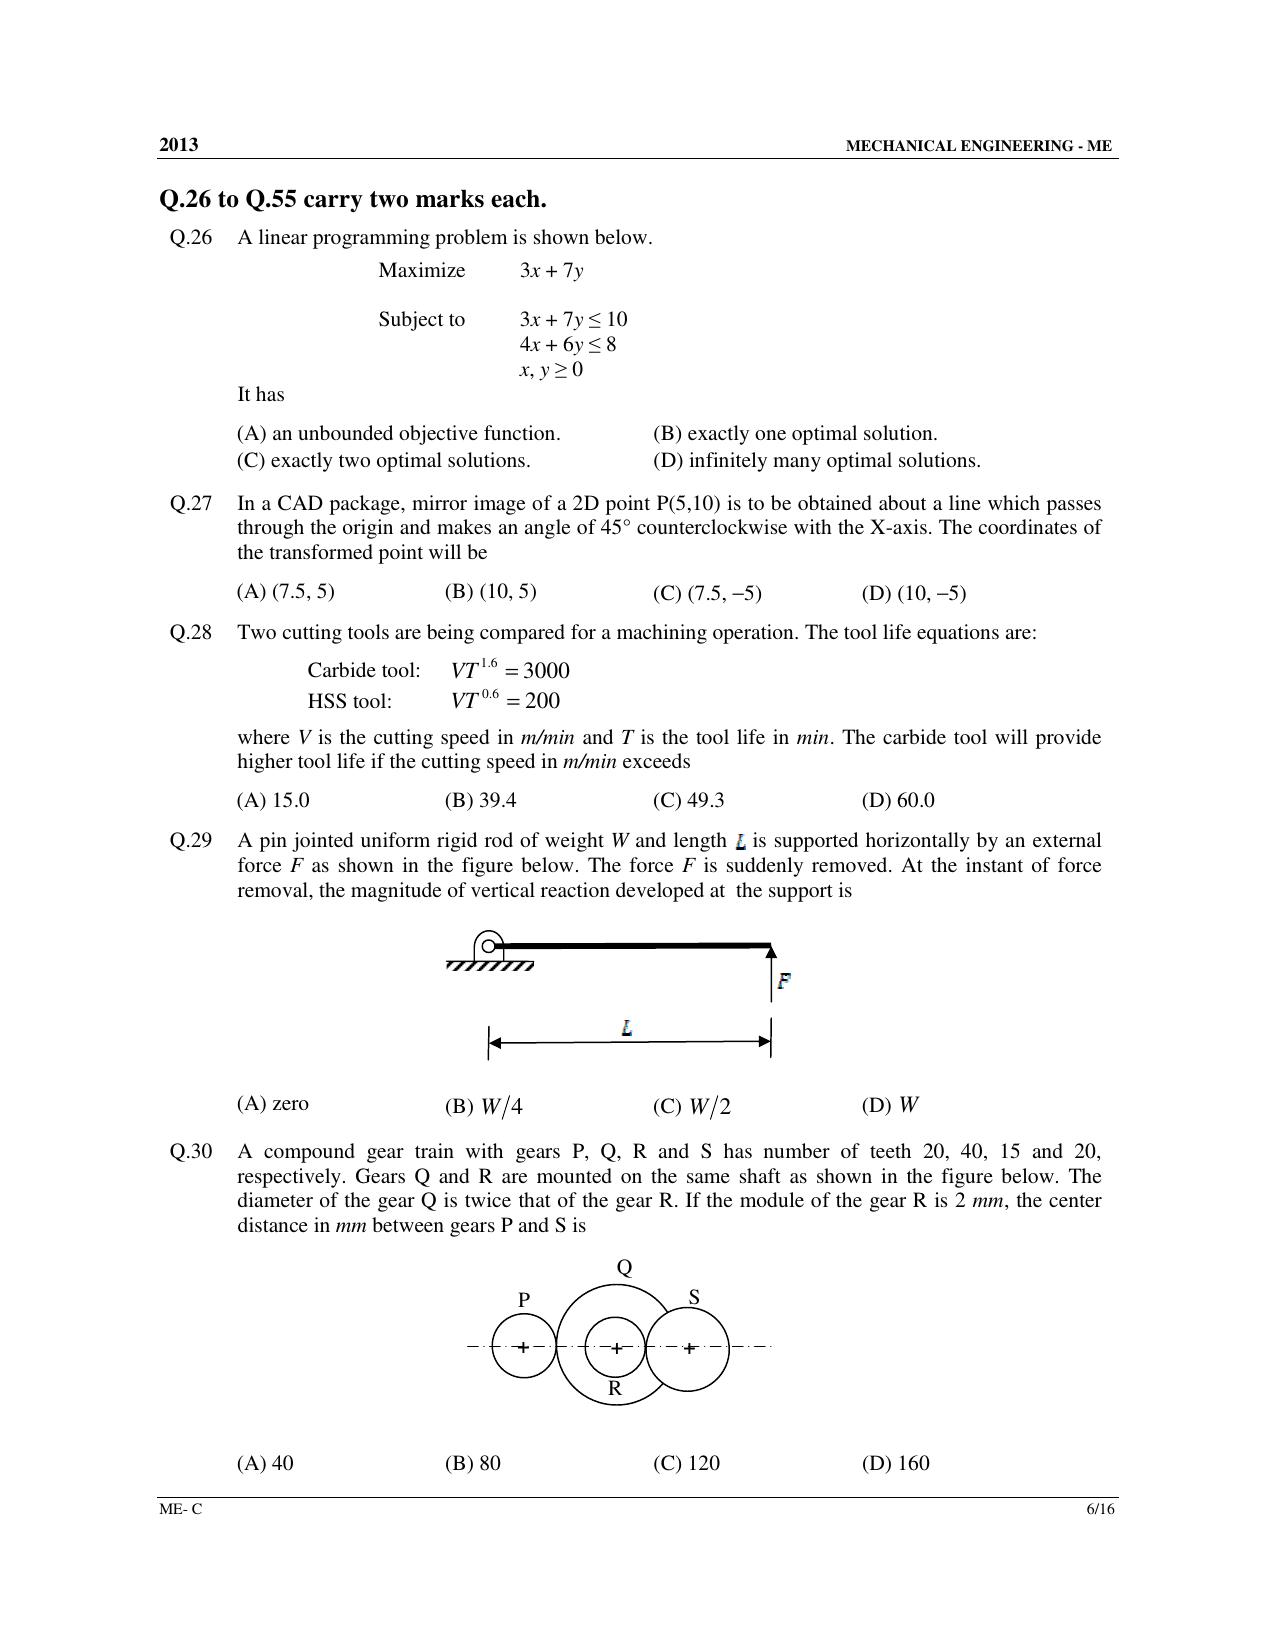 GATE 2013 Mechanical Engineering (ME) Question Paper with Answer Key - Page 35